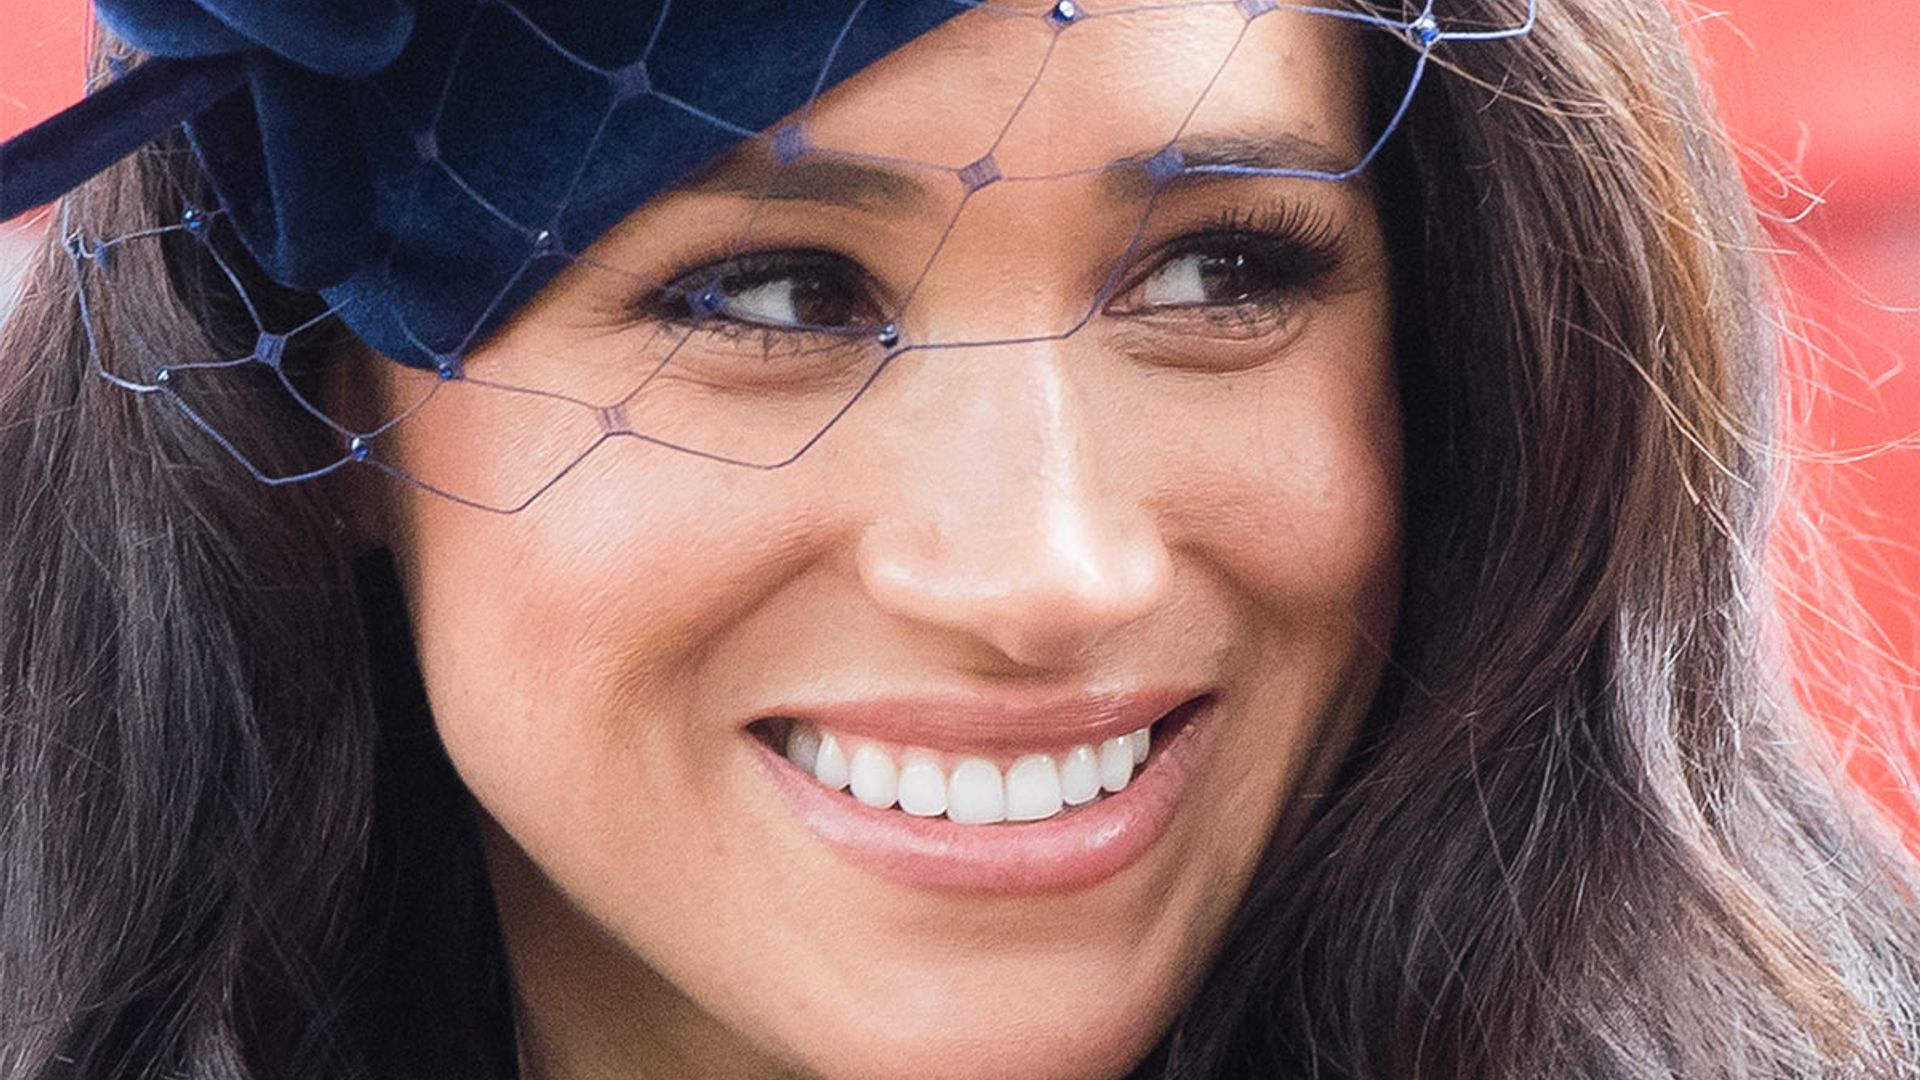 Meghan Markle's Time cover lipstick revealed - and it's gorgeous